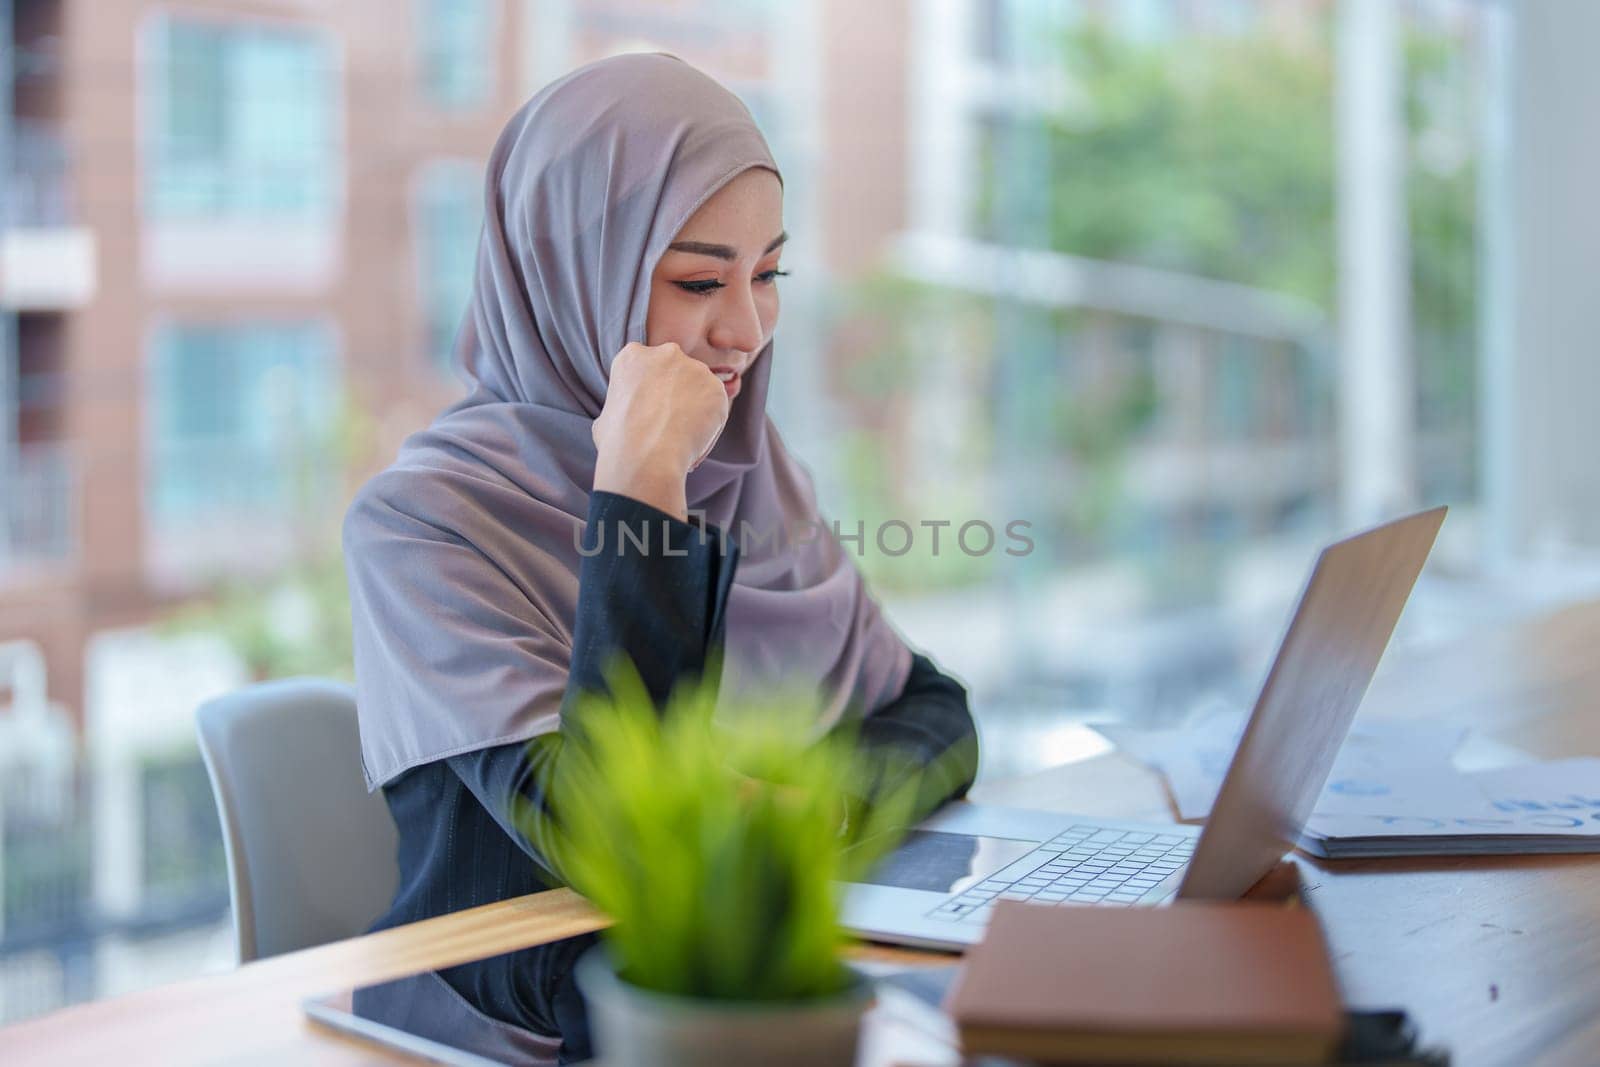 eautiful Muslim woman using computer and documents working in office by Manastrong